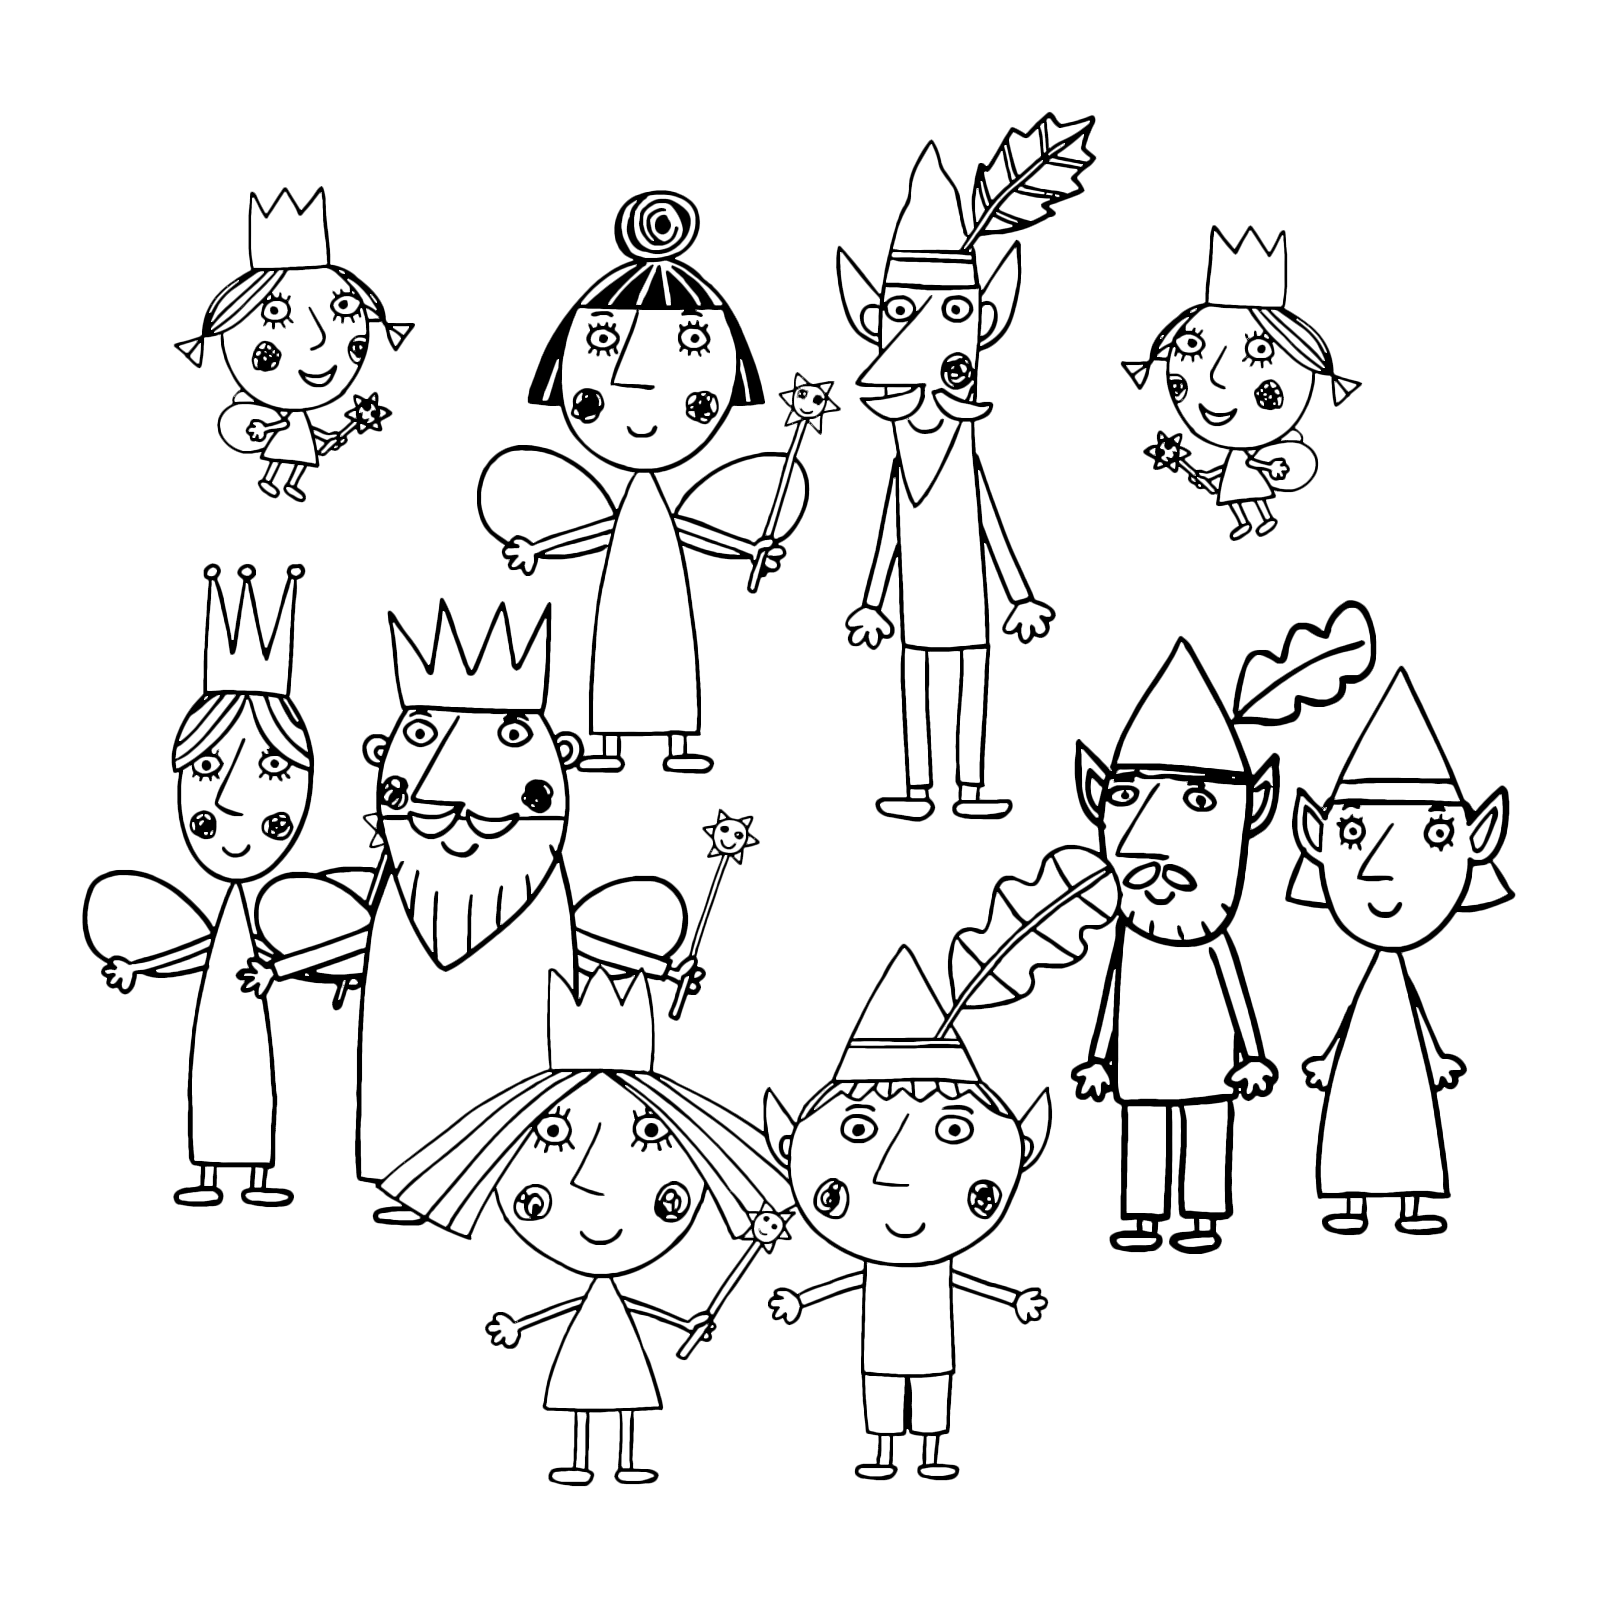 Ben & Holly's Little Kingdom - All the characters from Ben and Holly Little Kingdom